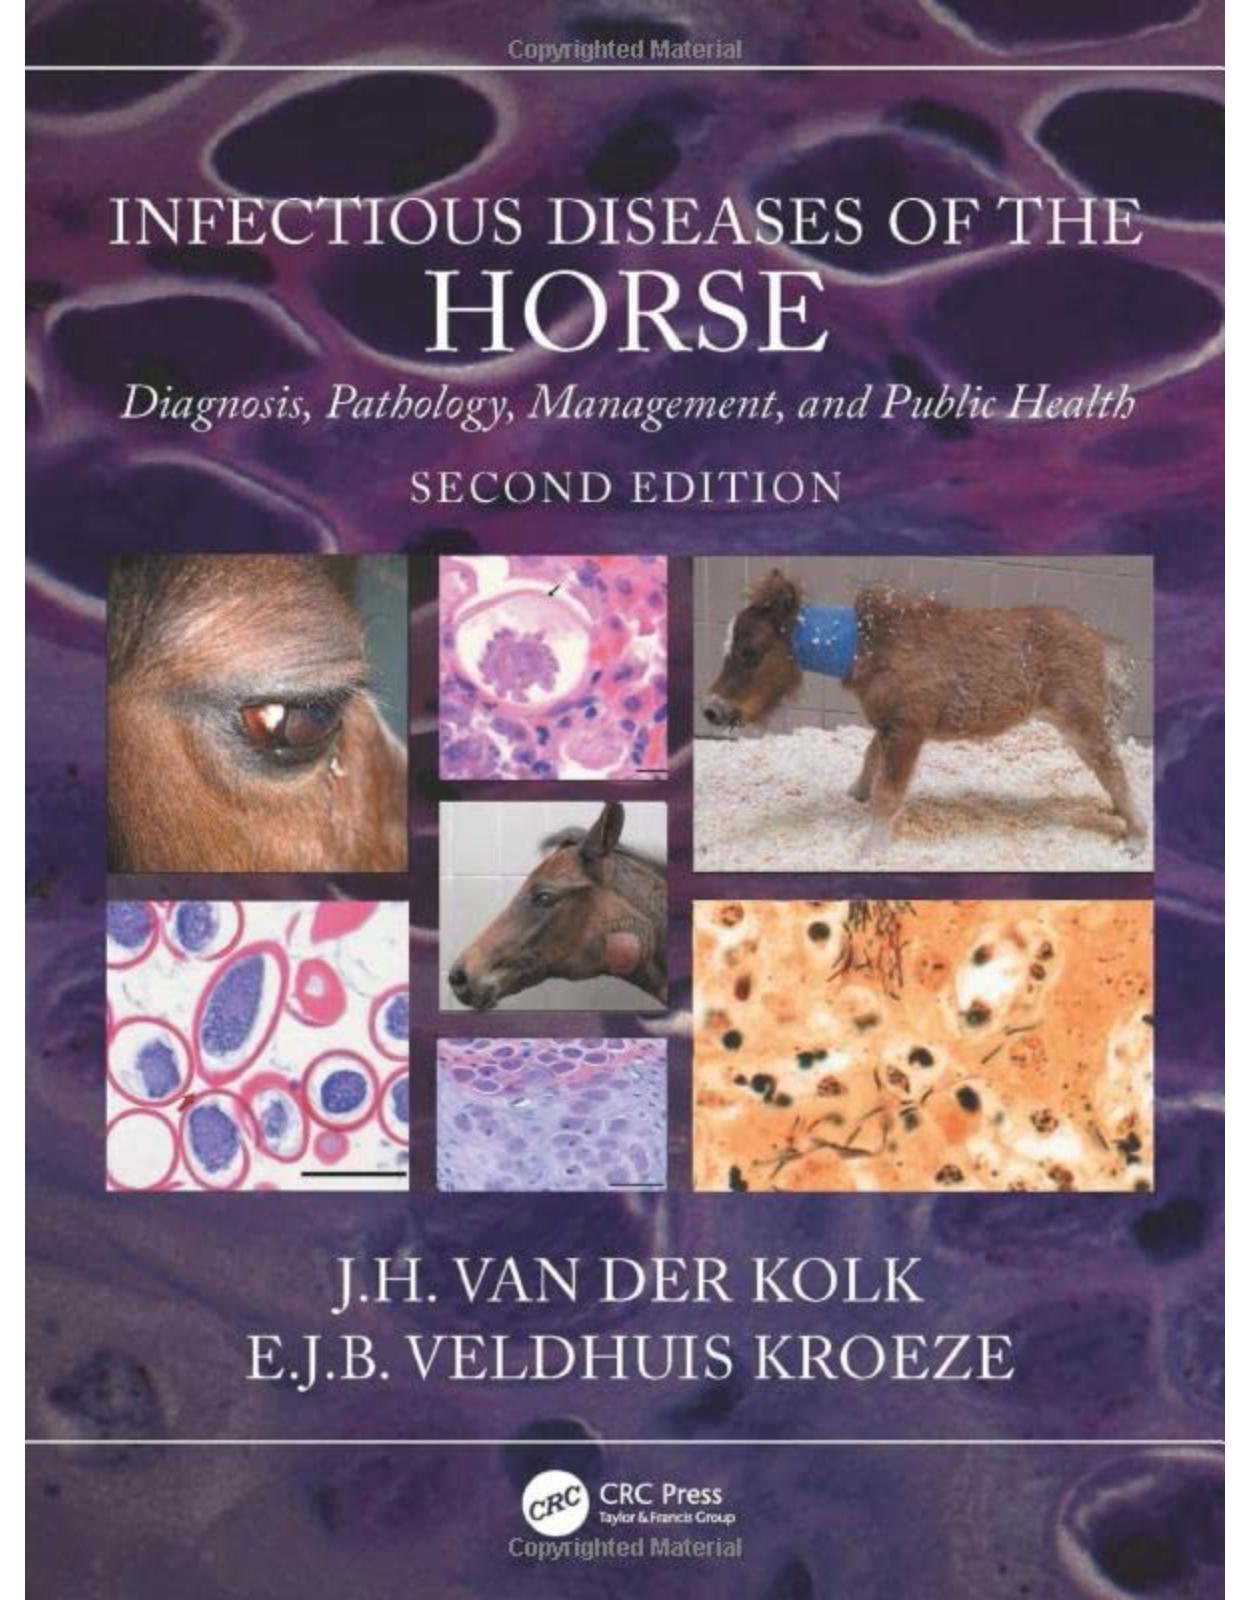 Infectious Diseases of the Horse